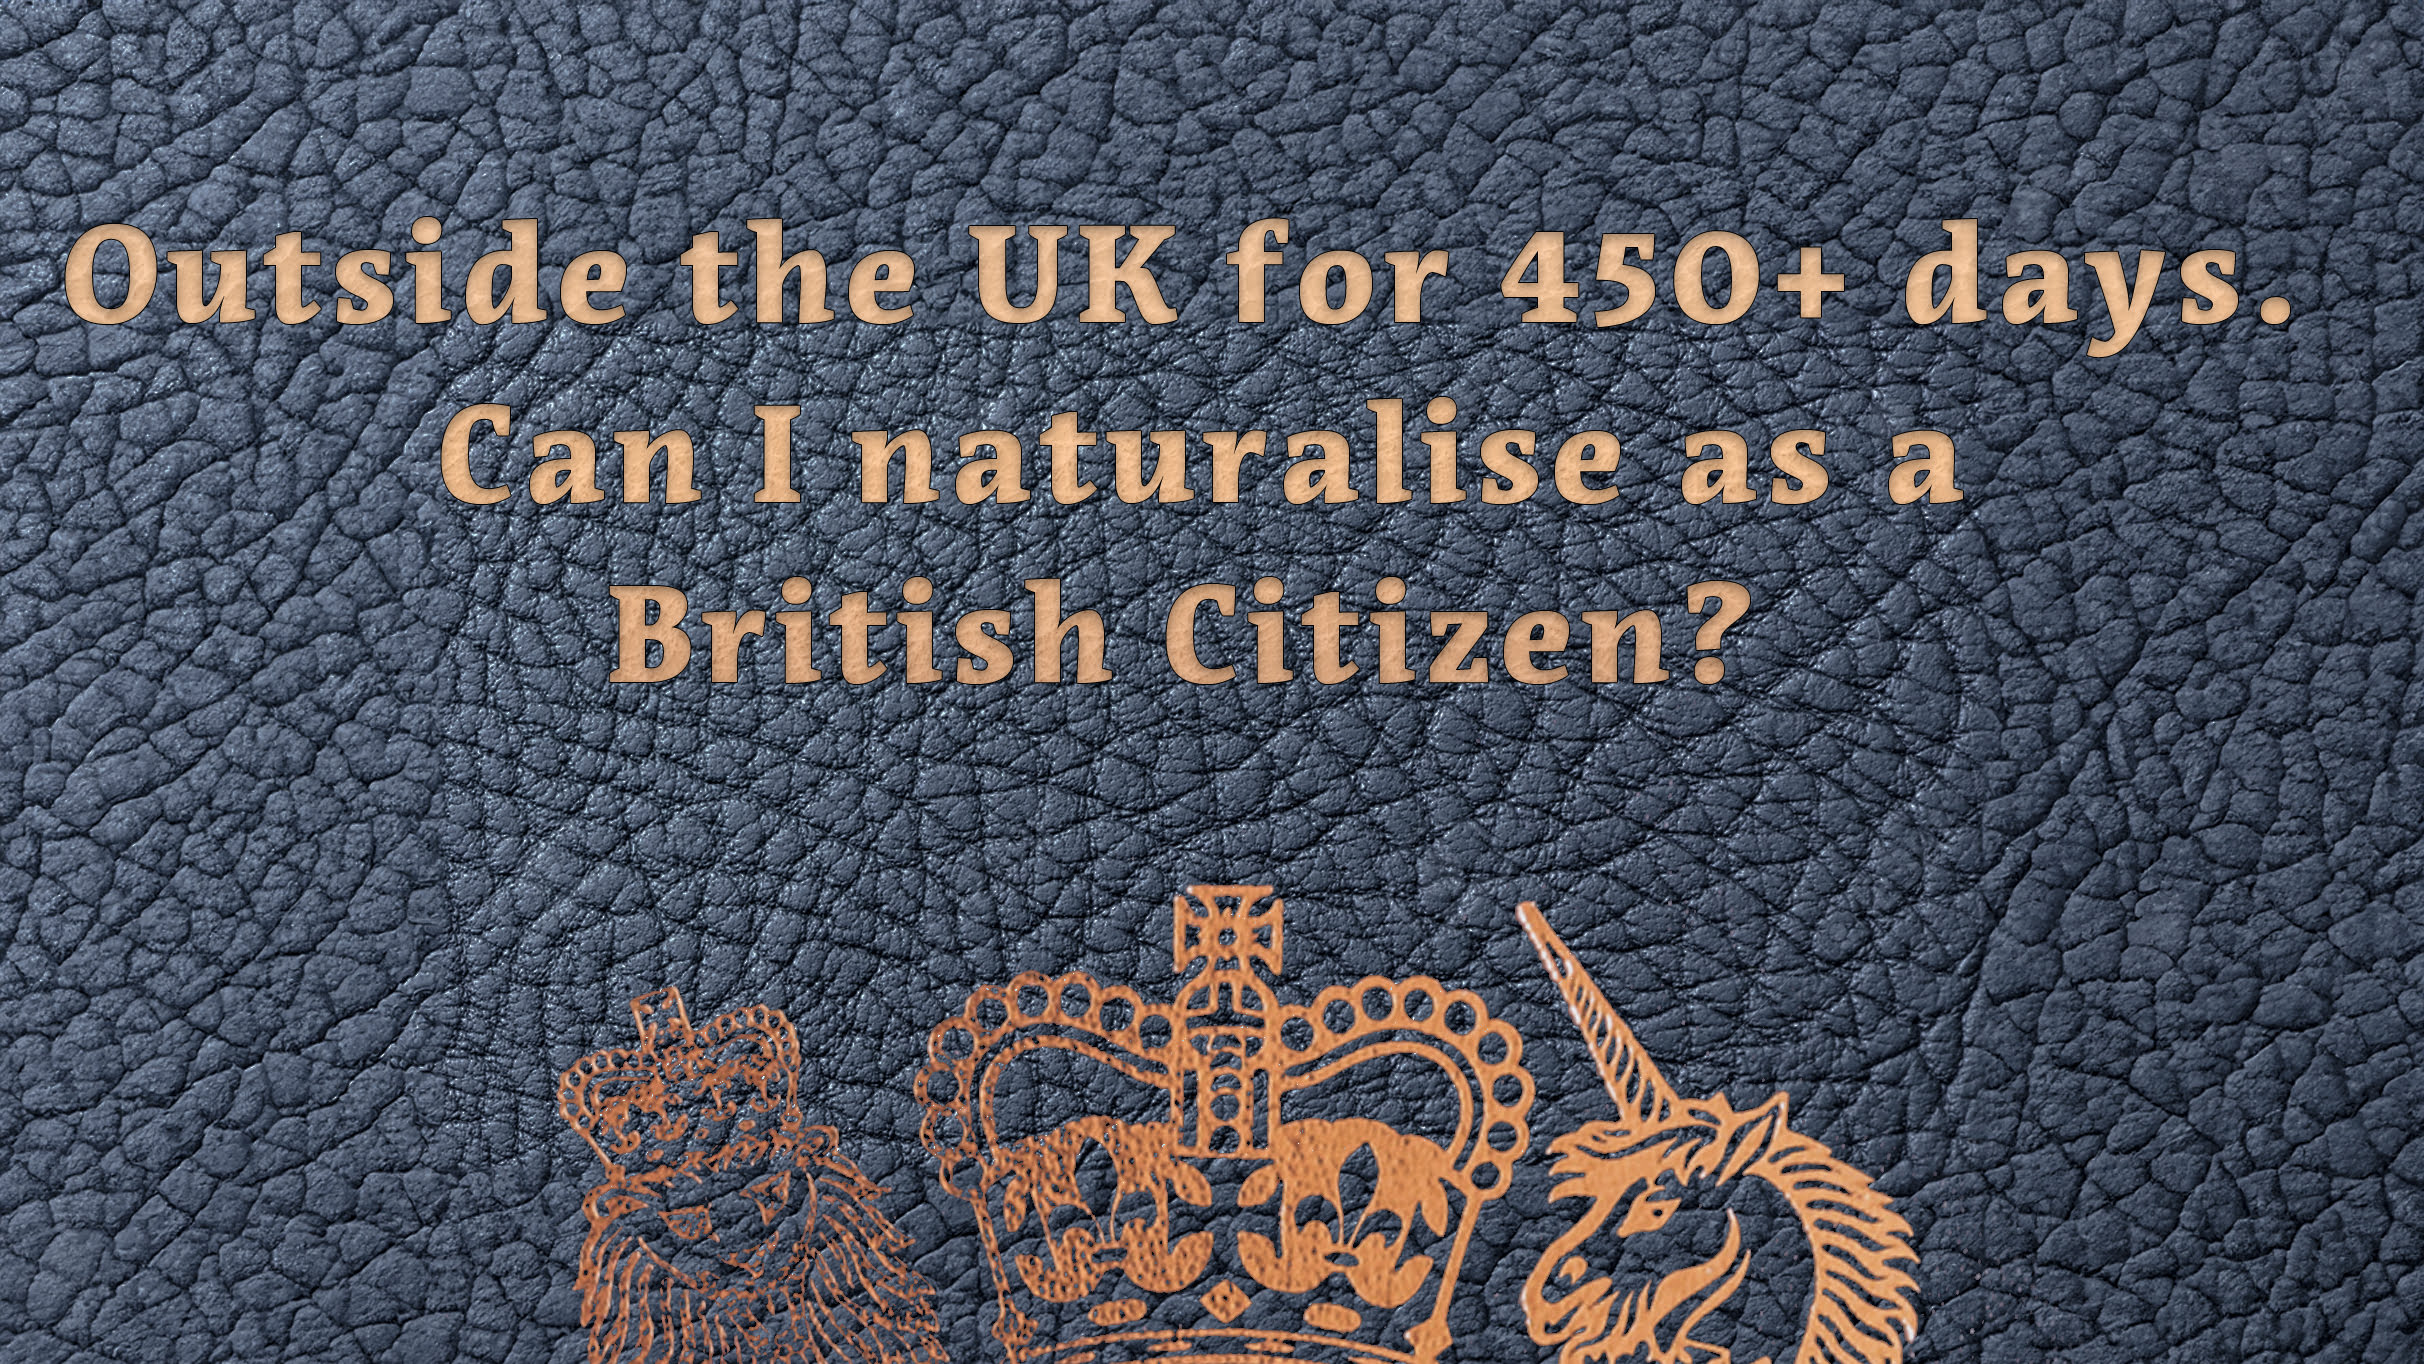 ‘I have been outside the UK for more than 450 days. Can I naturalise as a British citizen?’